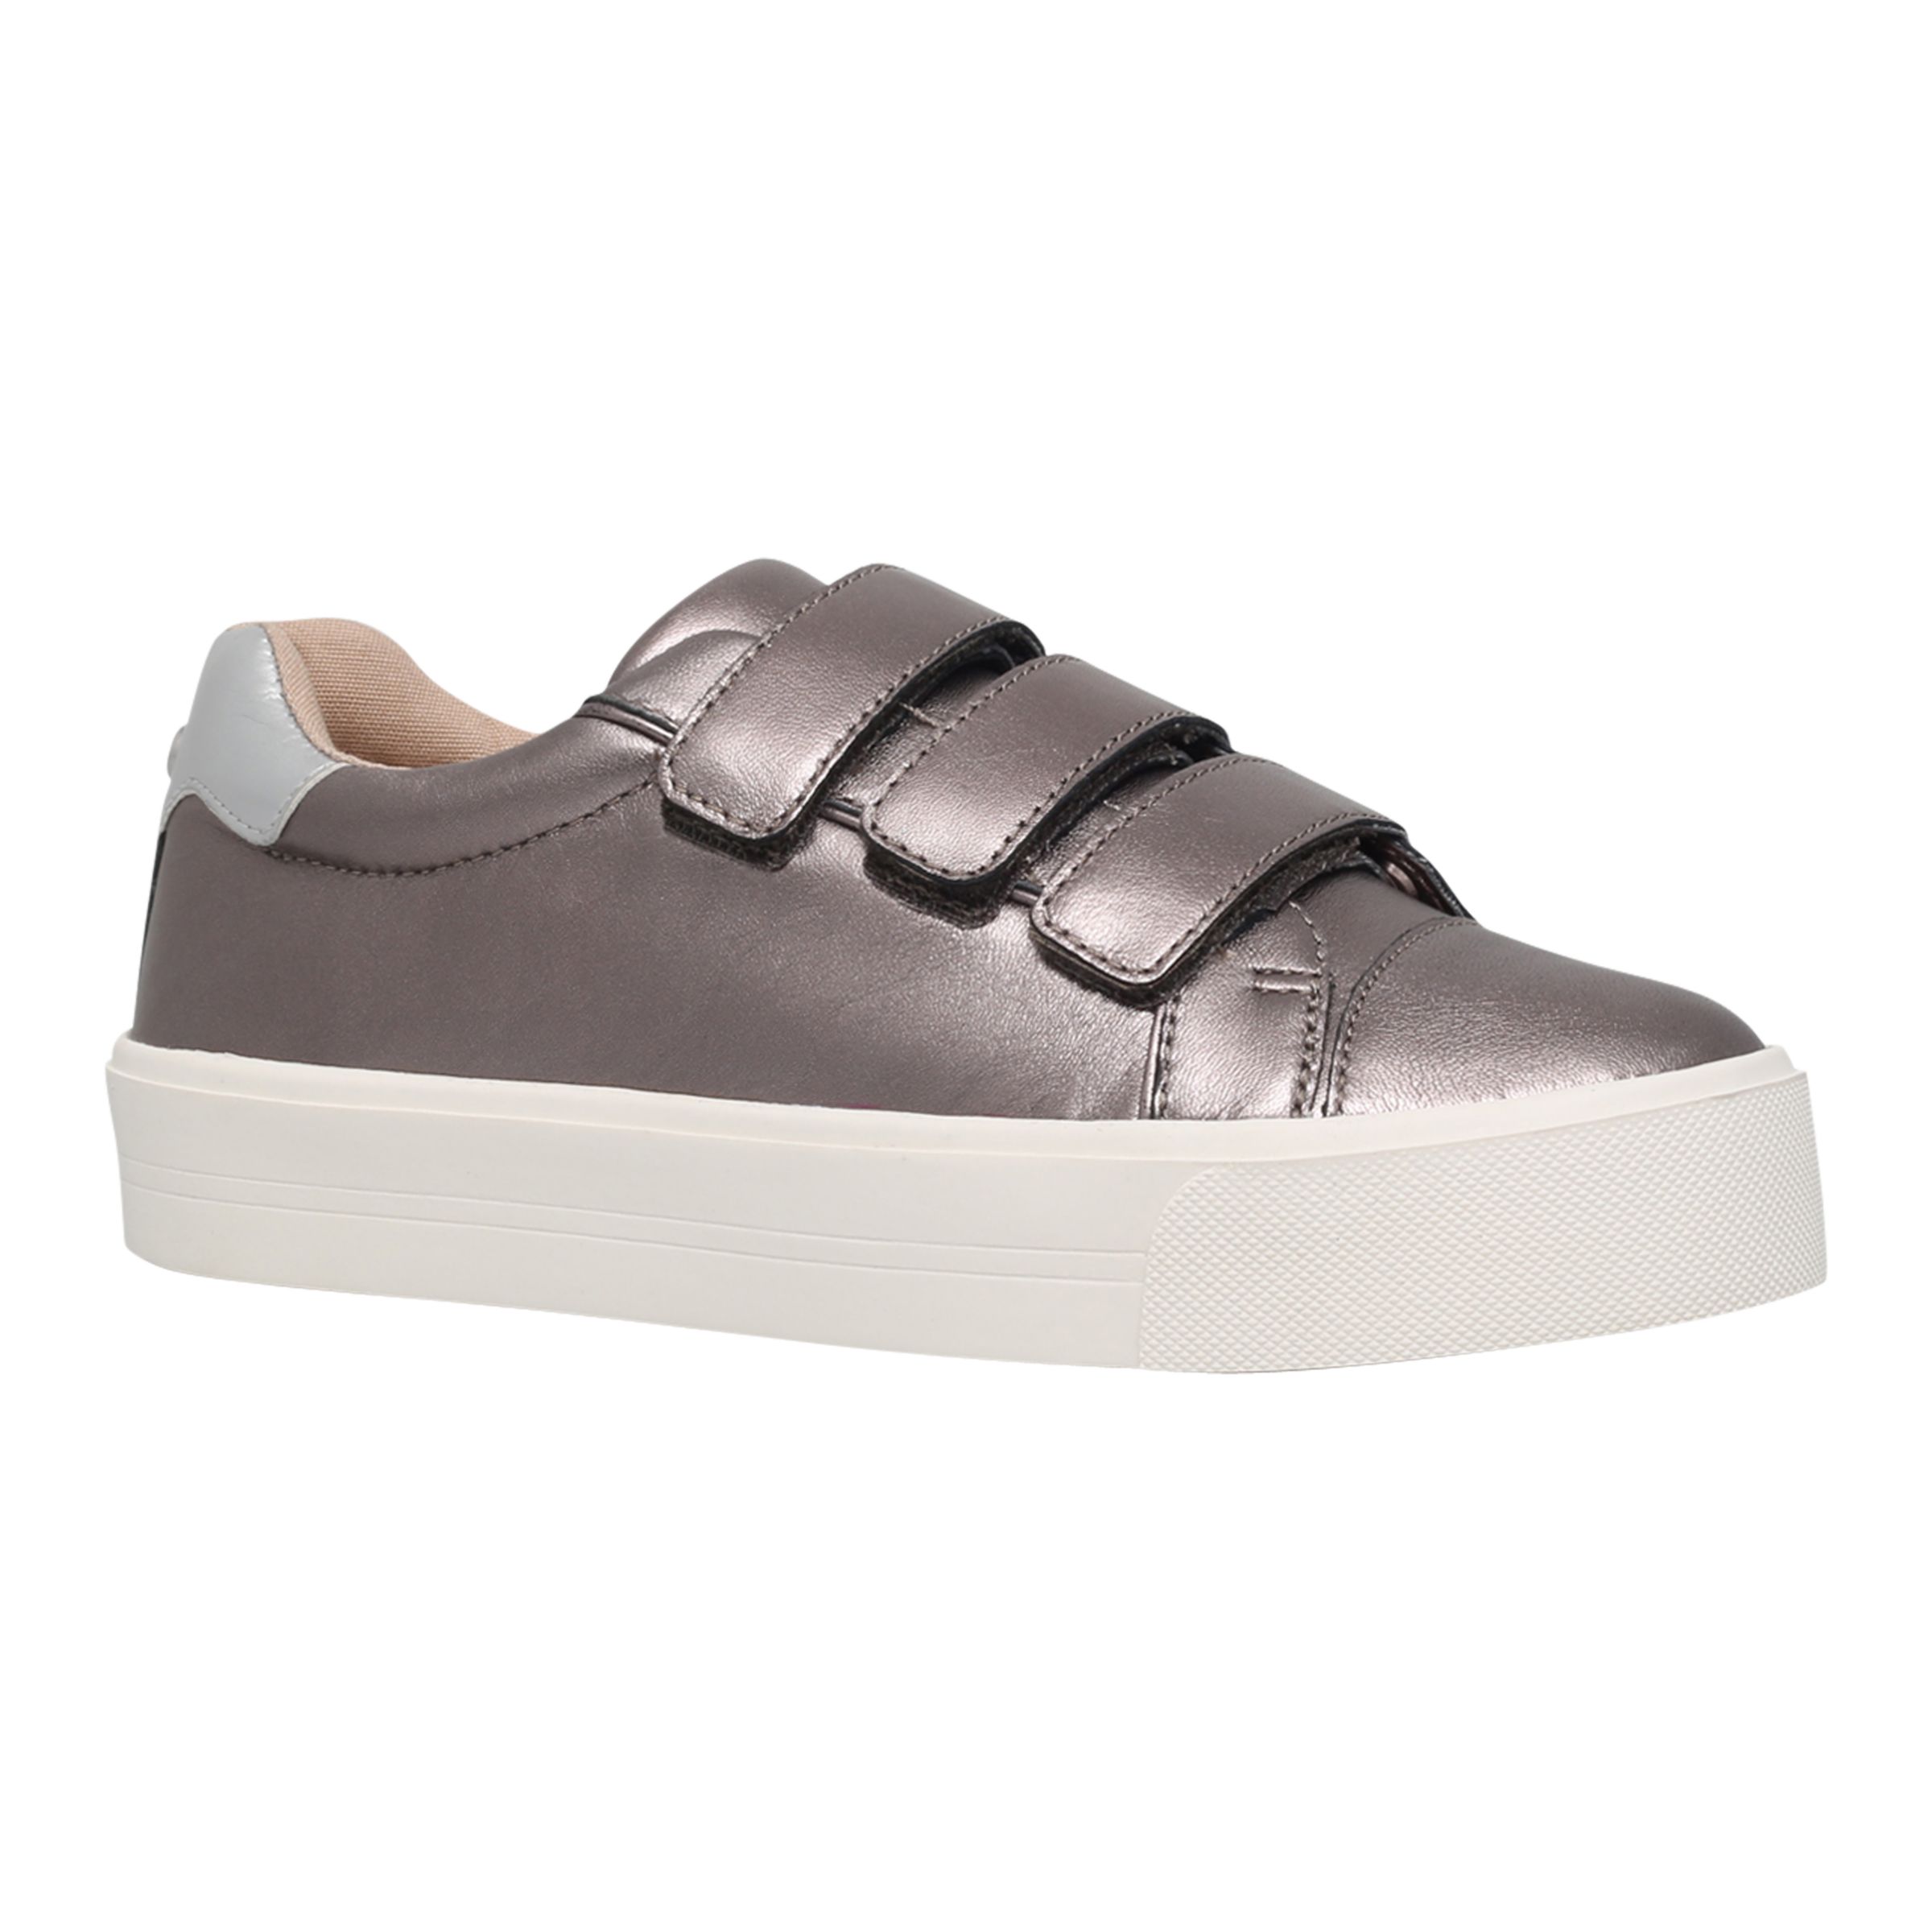 Carvela Lily Leather Sports Shoes, Pewter, 8